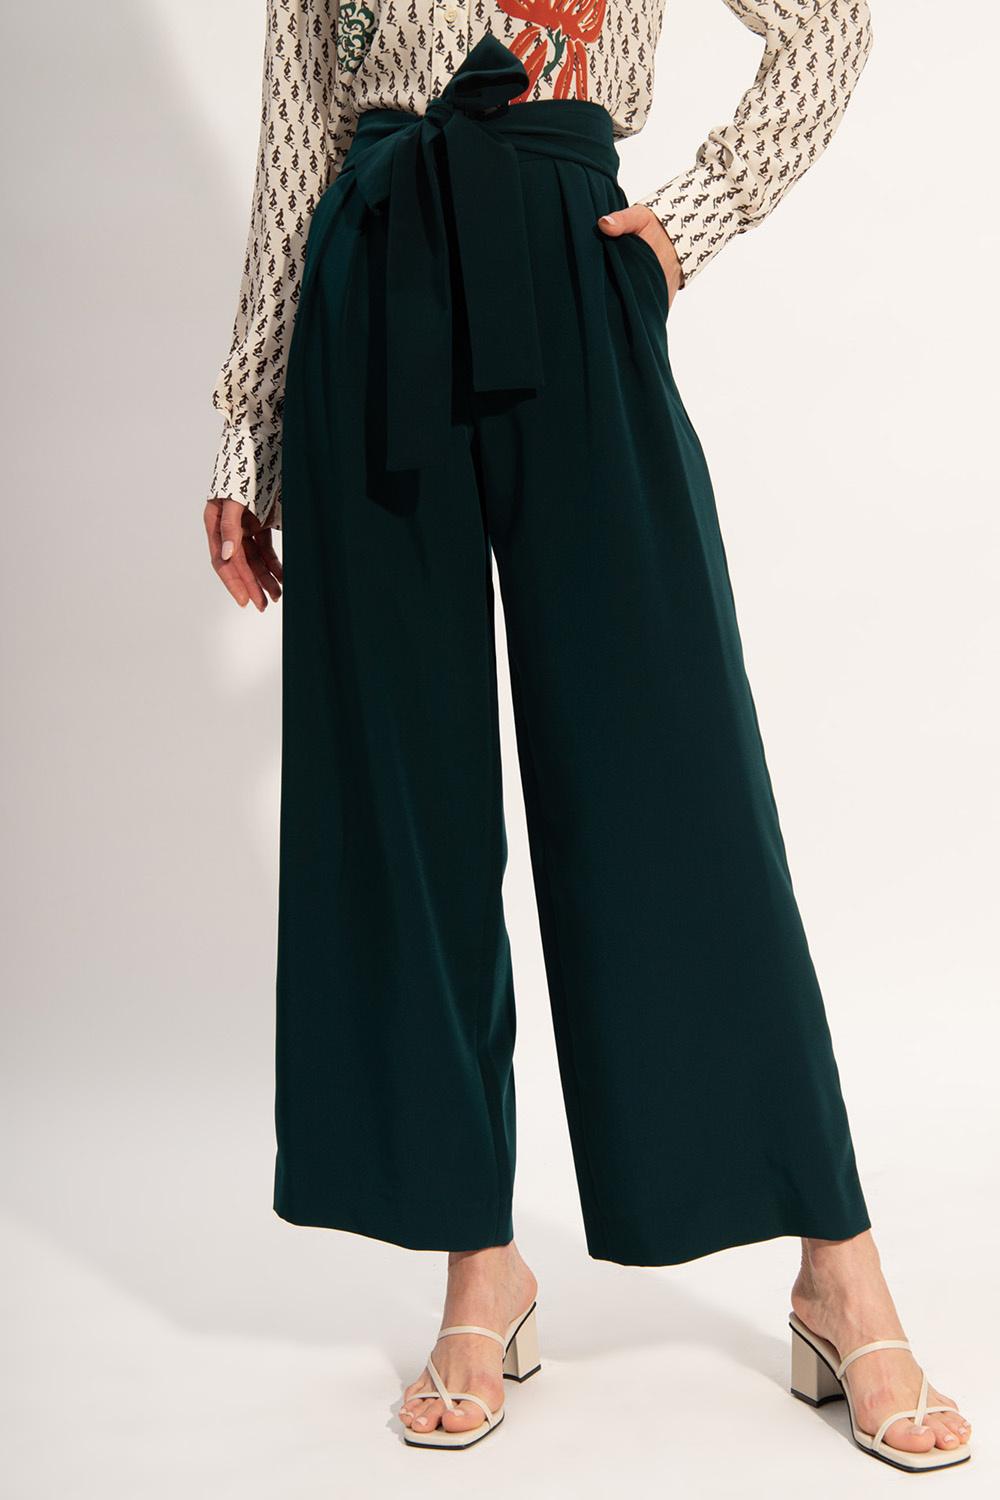 See By Chloé Trousers With Tie Closure, Plain Pattern in Green | Lyst